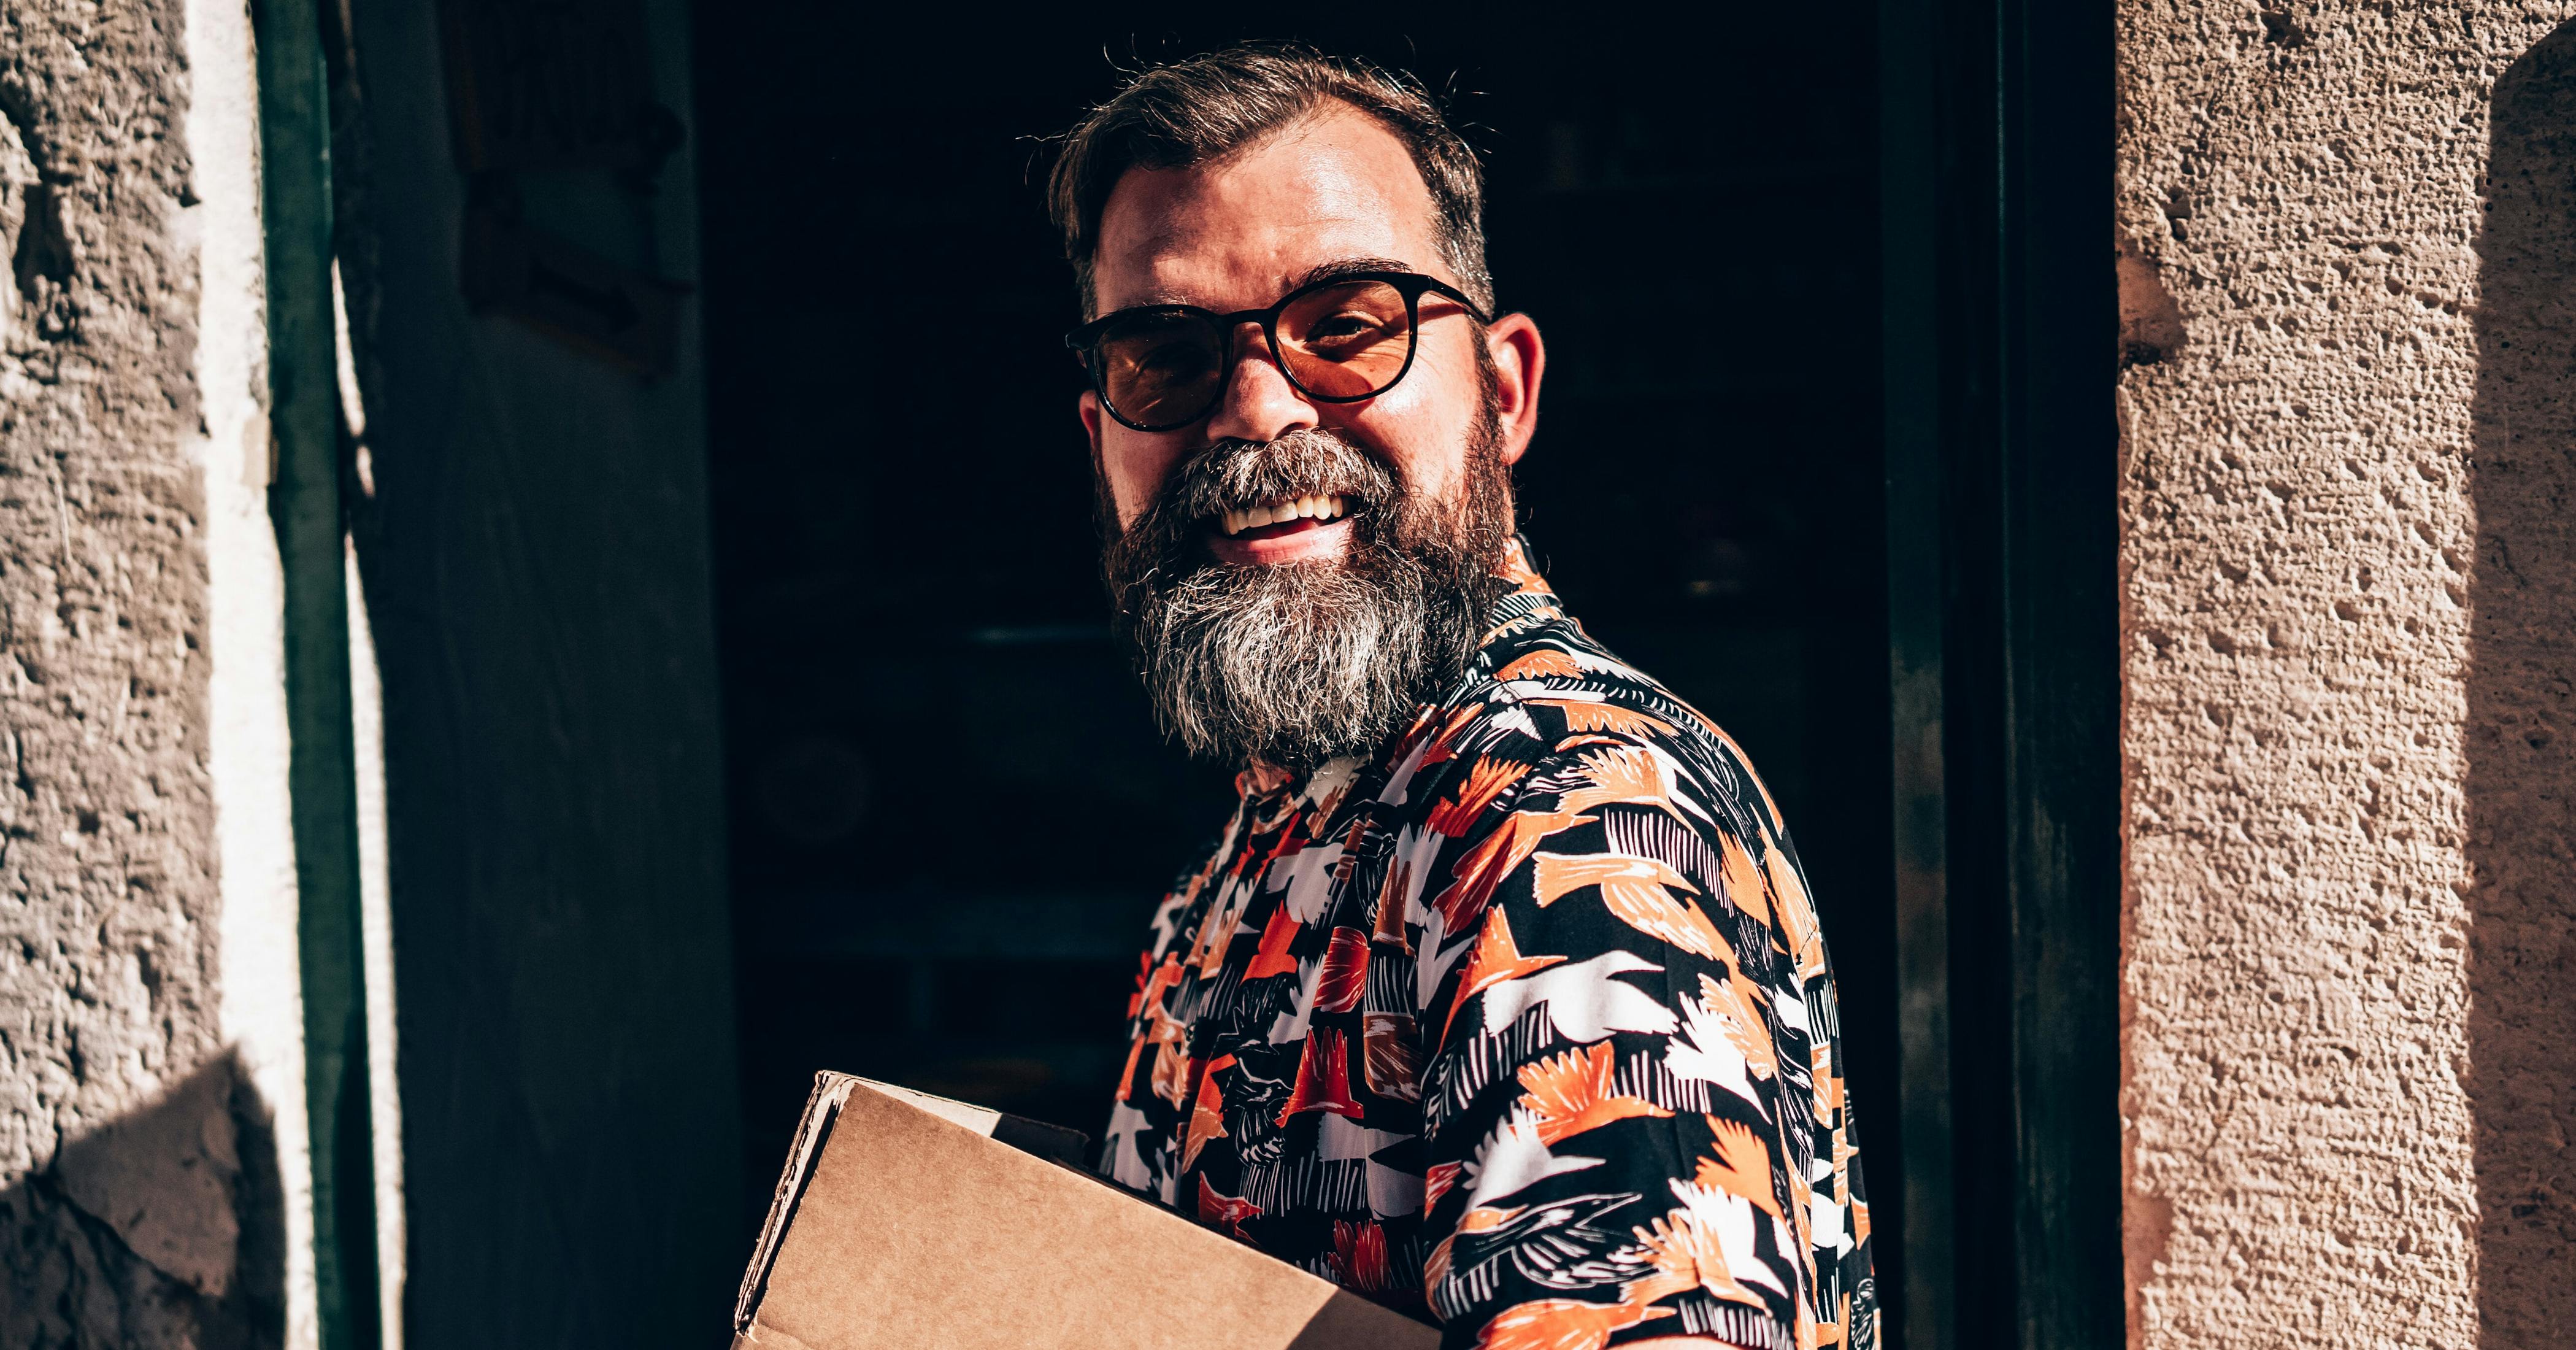 Smiling man in sunglasses wearing a shirt with a vibrant nature-themed print, holding a cardboard box and entering a building door on the street.